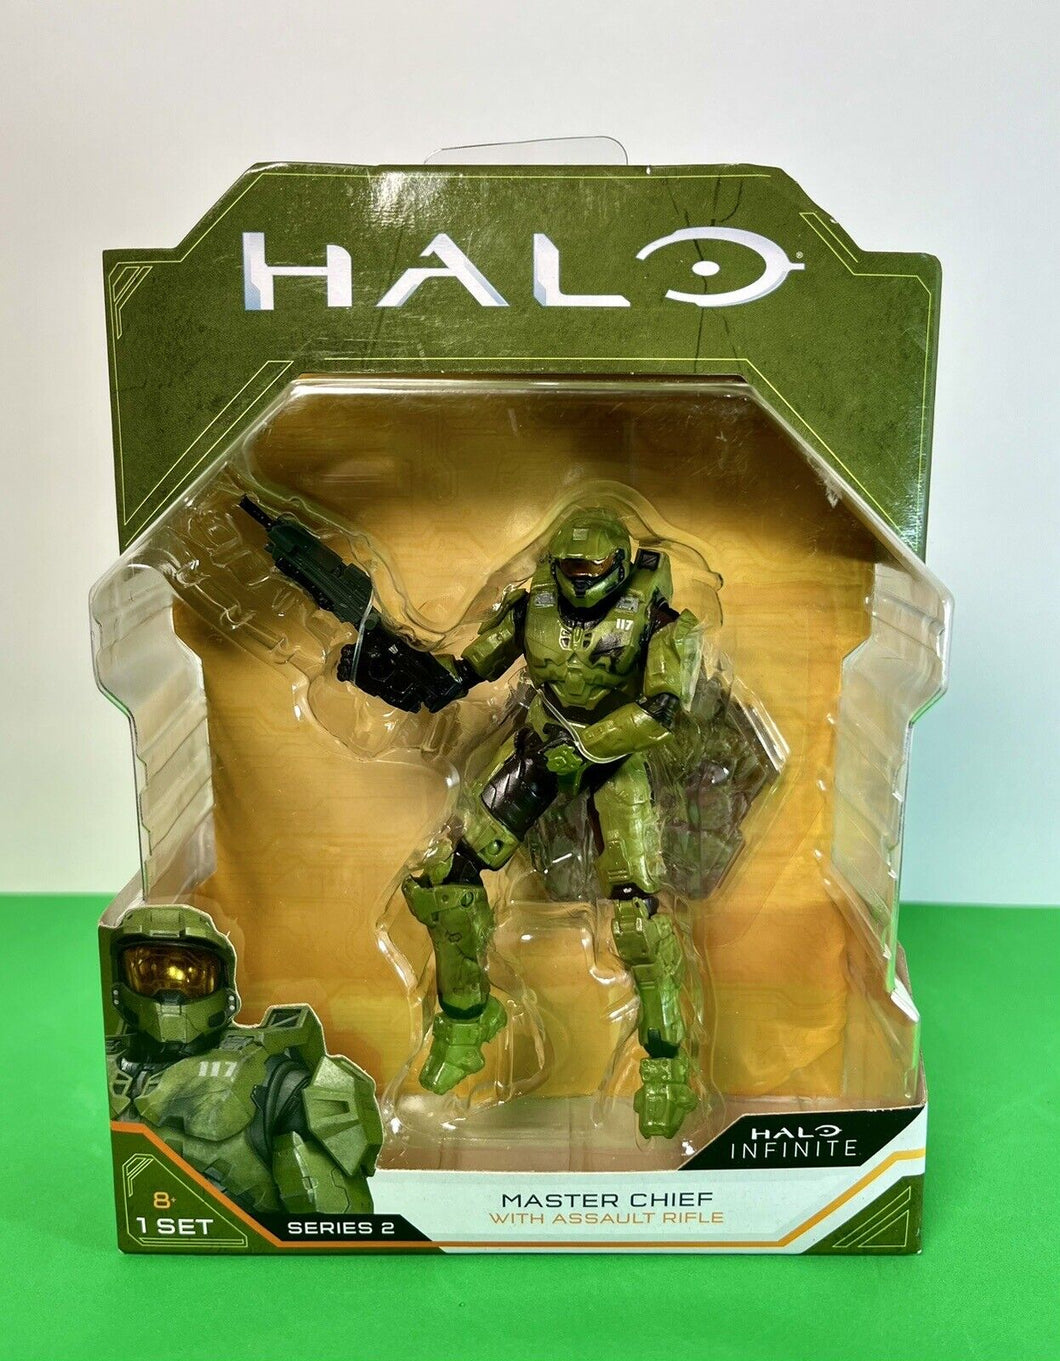 2020 World of Halo Infinite Series 2 4in Figure: MASTER CHIEF (w/ Assault Rifle)